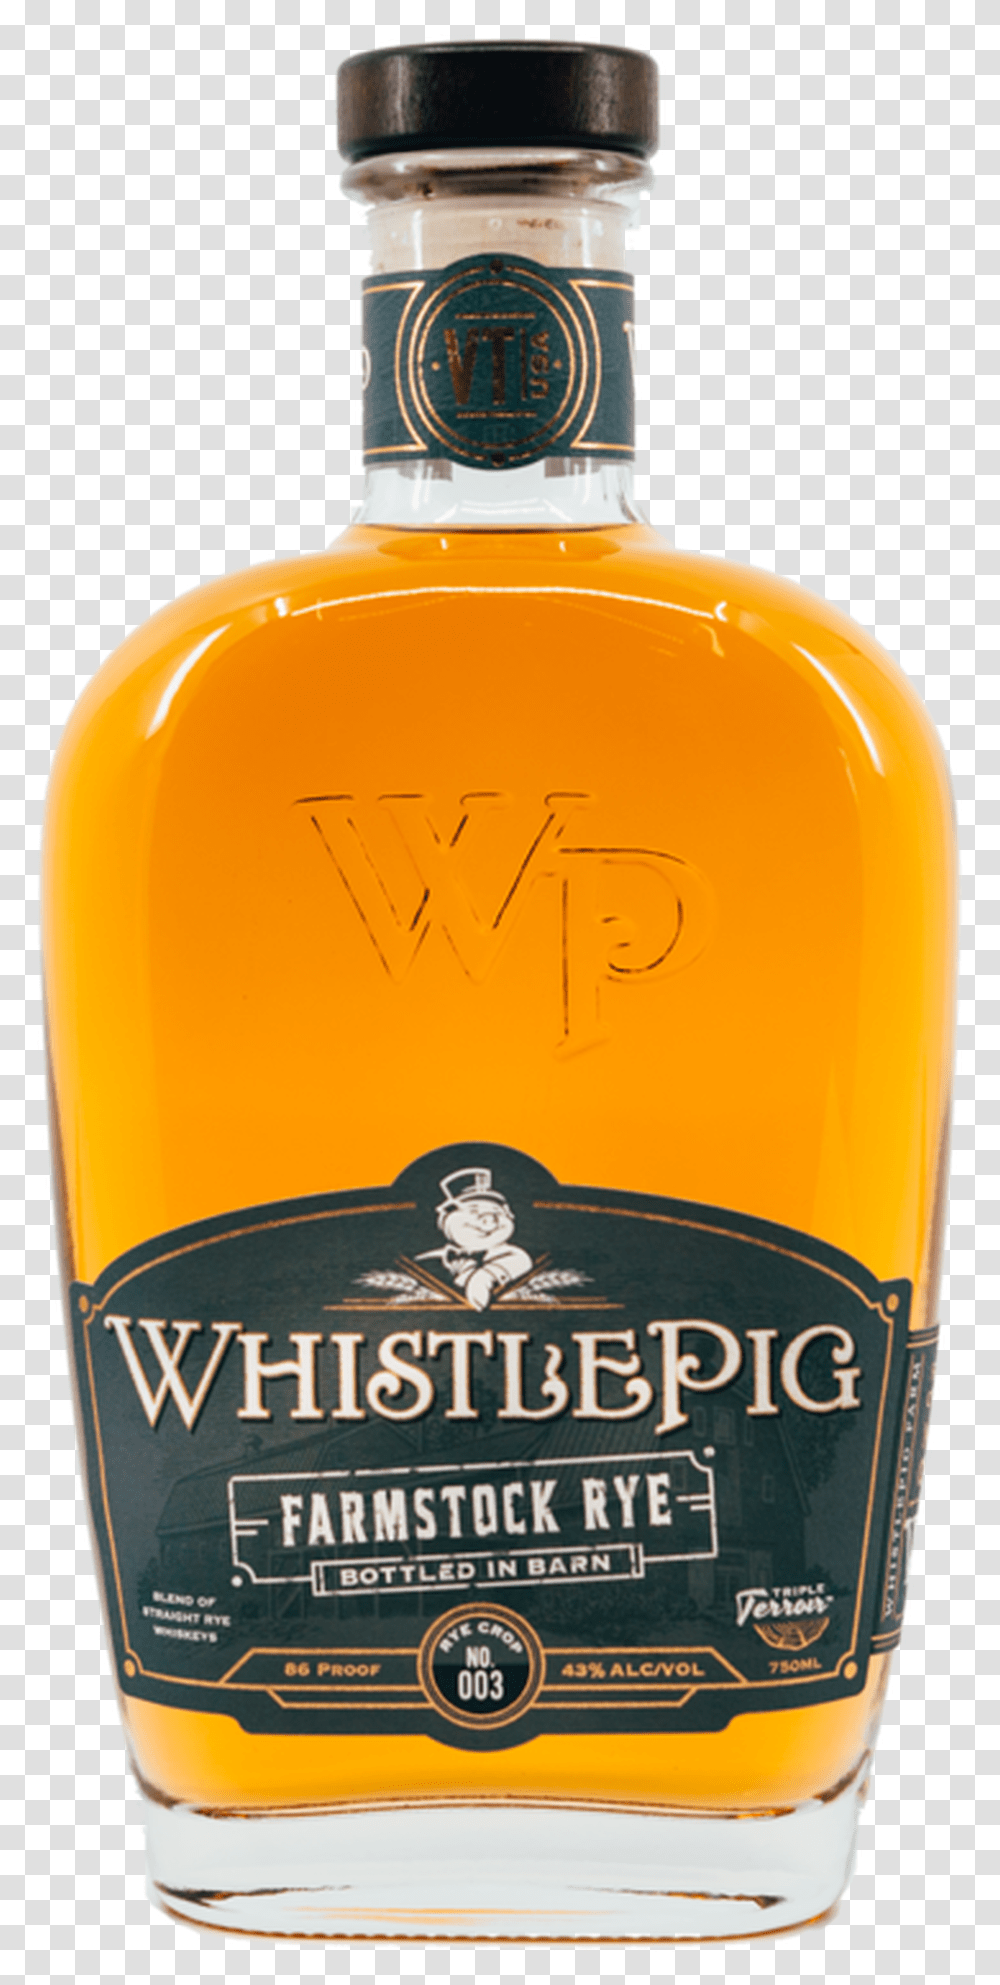 Whistle Pig Farmstock Rye Whiskey Crop Whistlepig Farmstock Rye Crop No, Liquor, Alcohol, Beverage, Drink Transparent Png